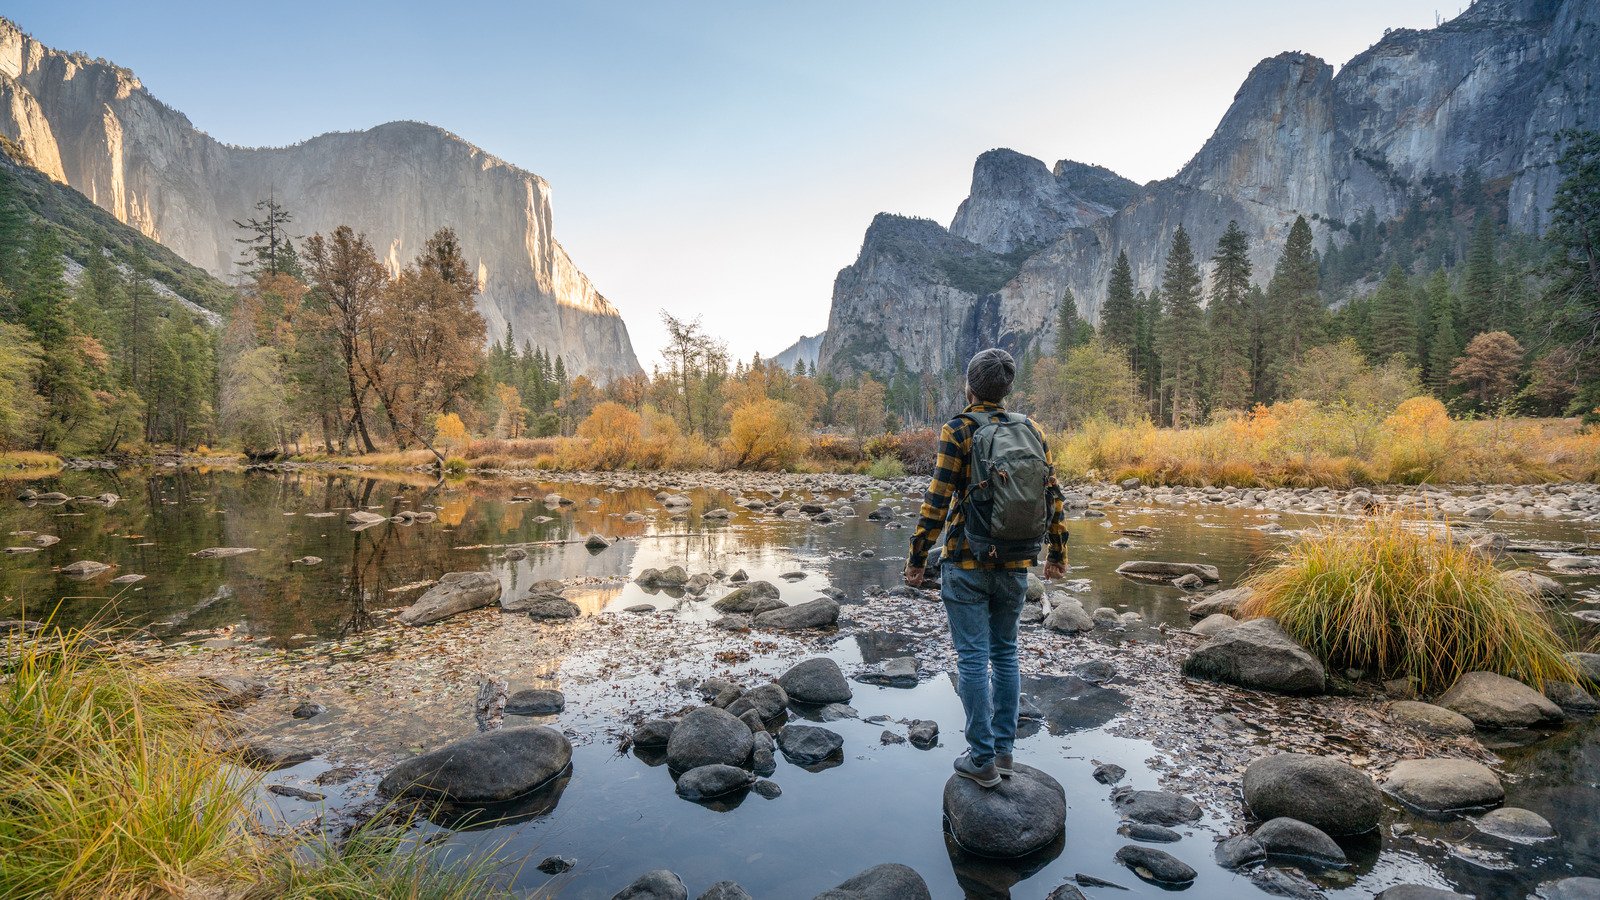 Must-Visit National Parks To Add To Your West Coast Bucket List